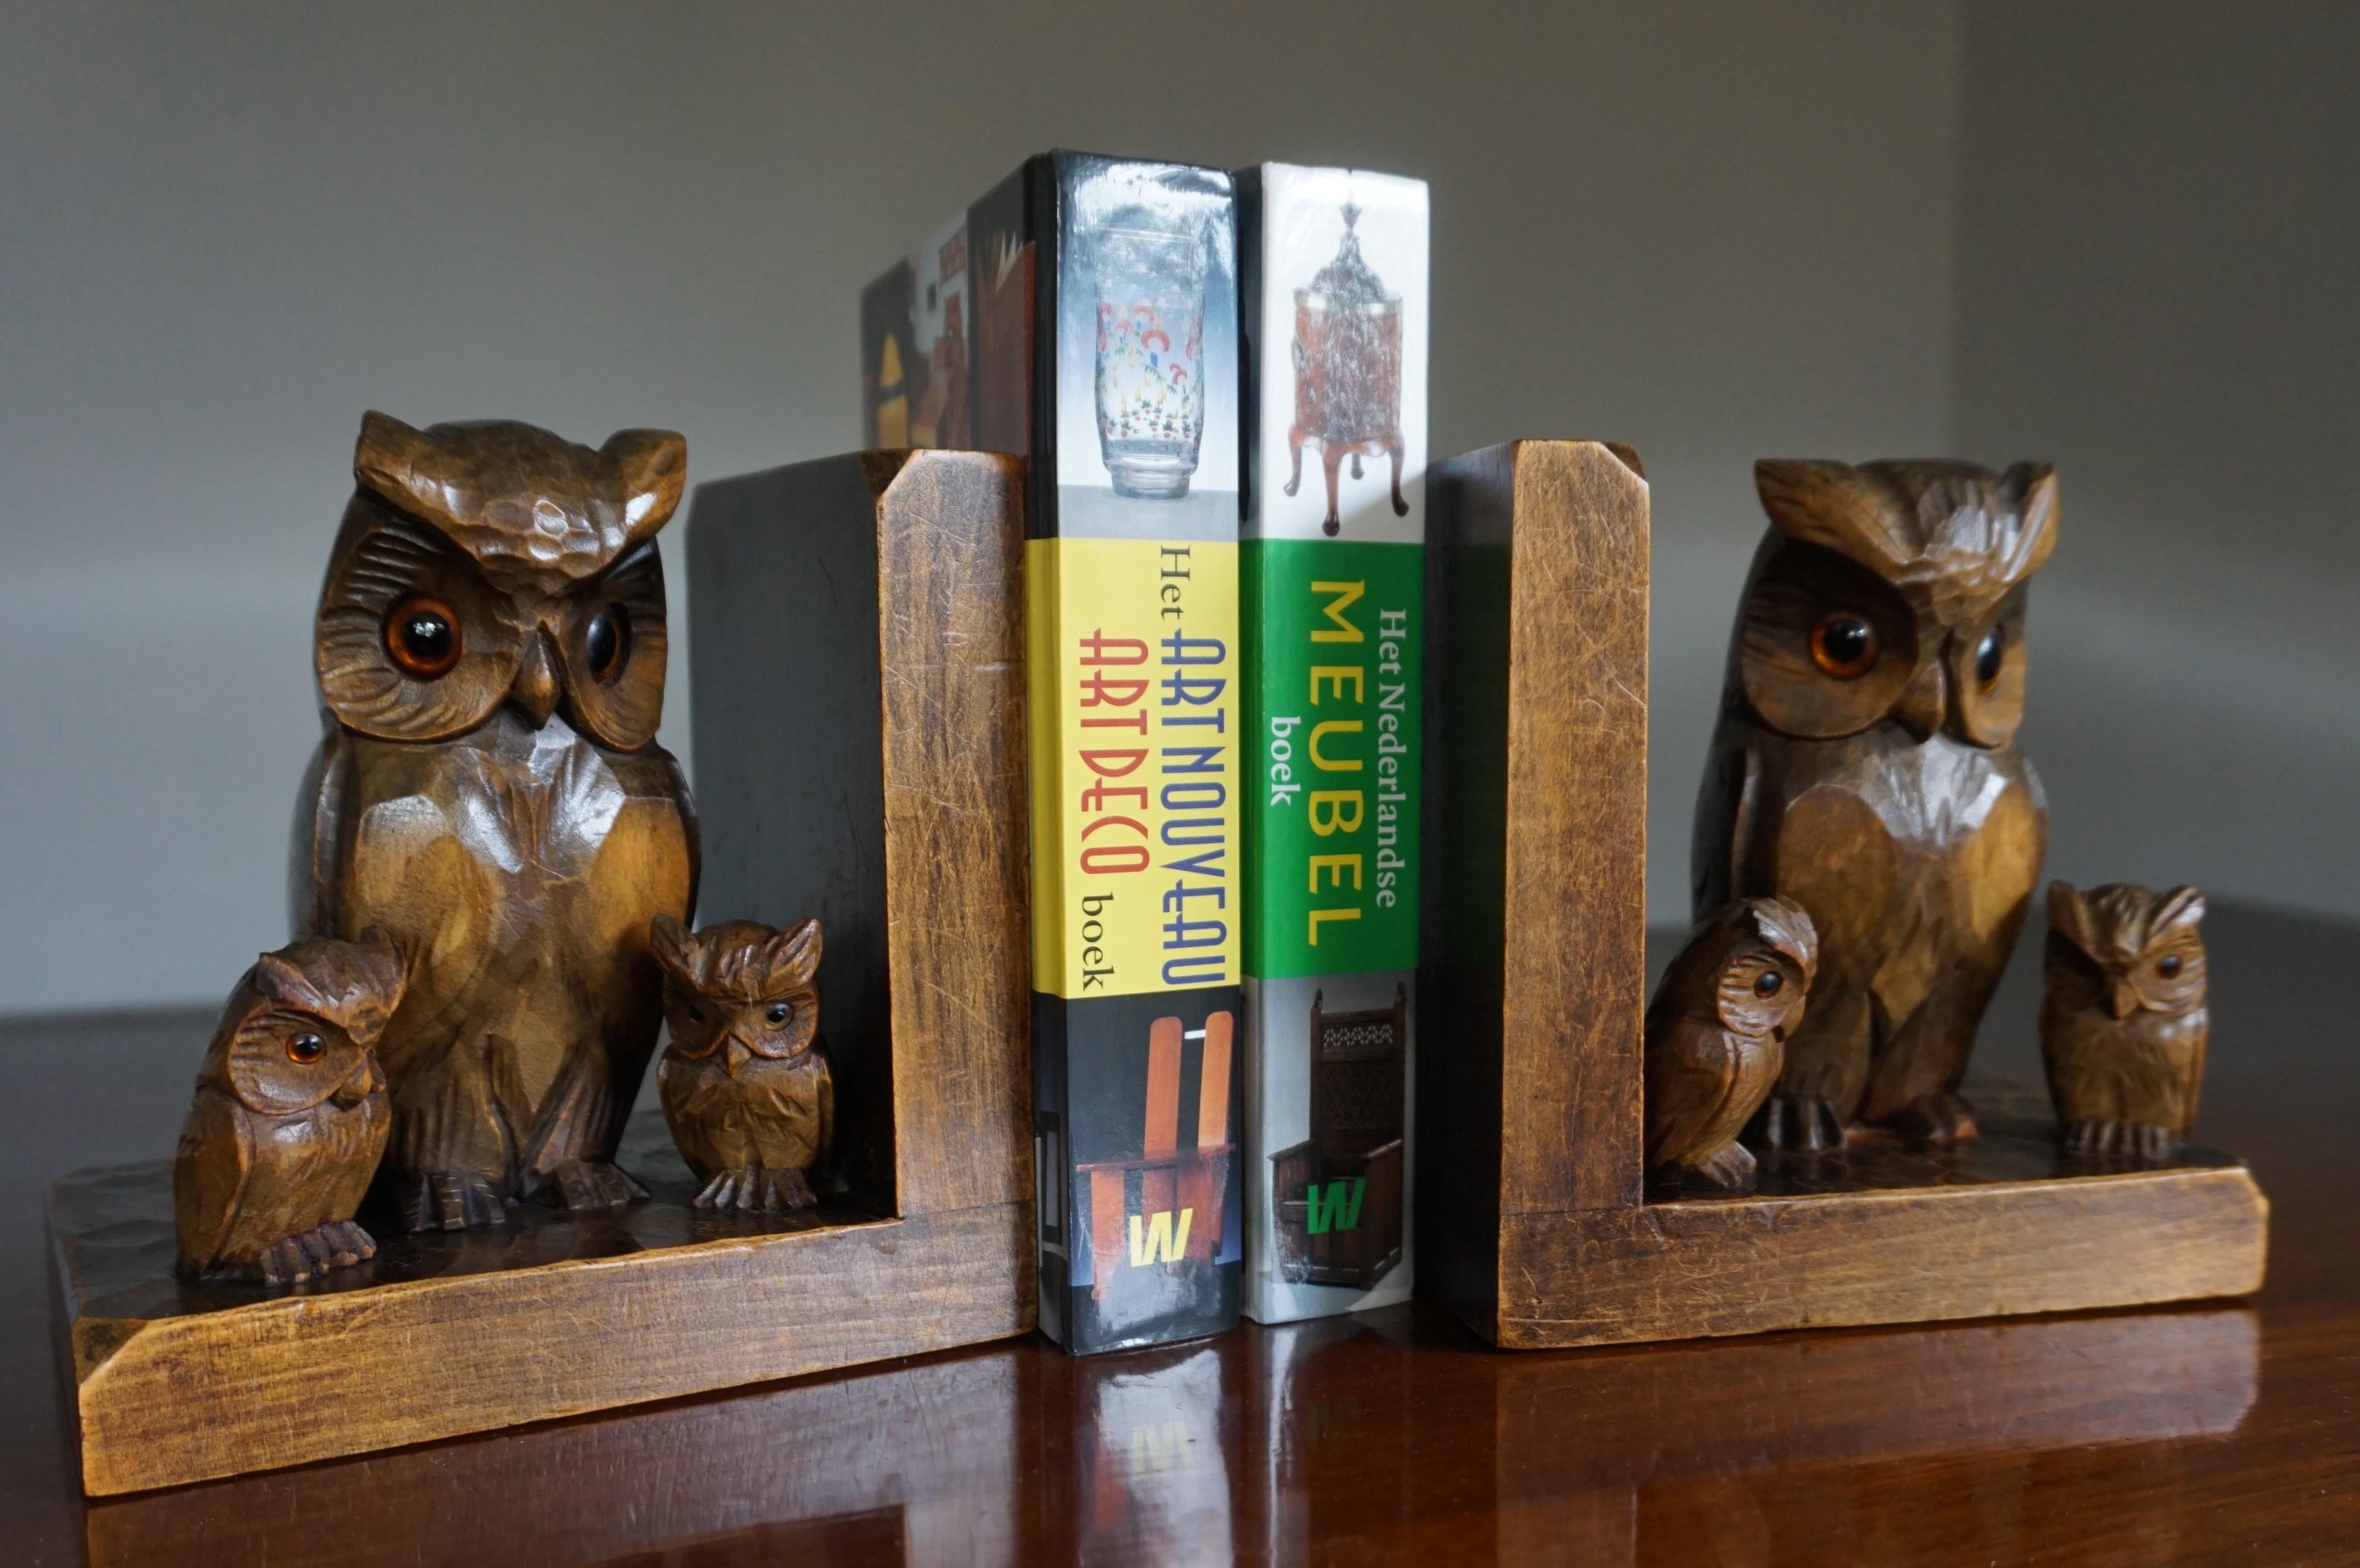 Small, but coolest pair of owls with offspring bookends.

Thanks to the wonderful combination of mature and young owls, these hand-carved bookends from the 1930s are an absolute joy to own and look. These sculptural bookends depicting the symbols of